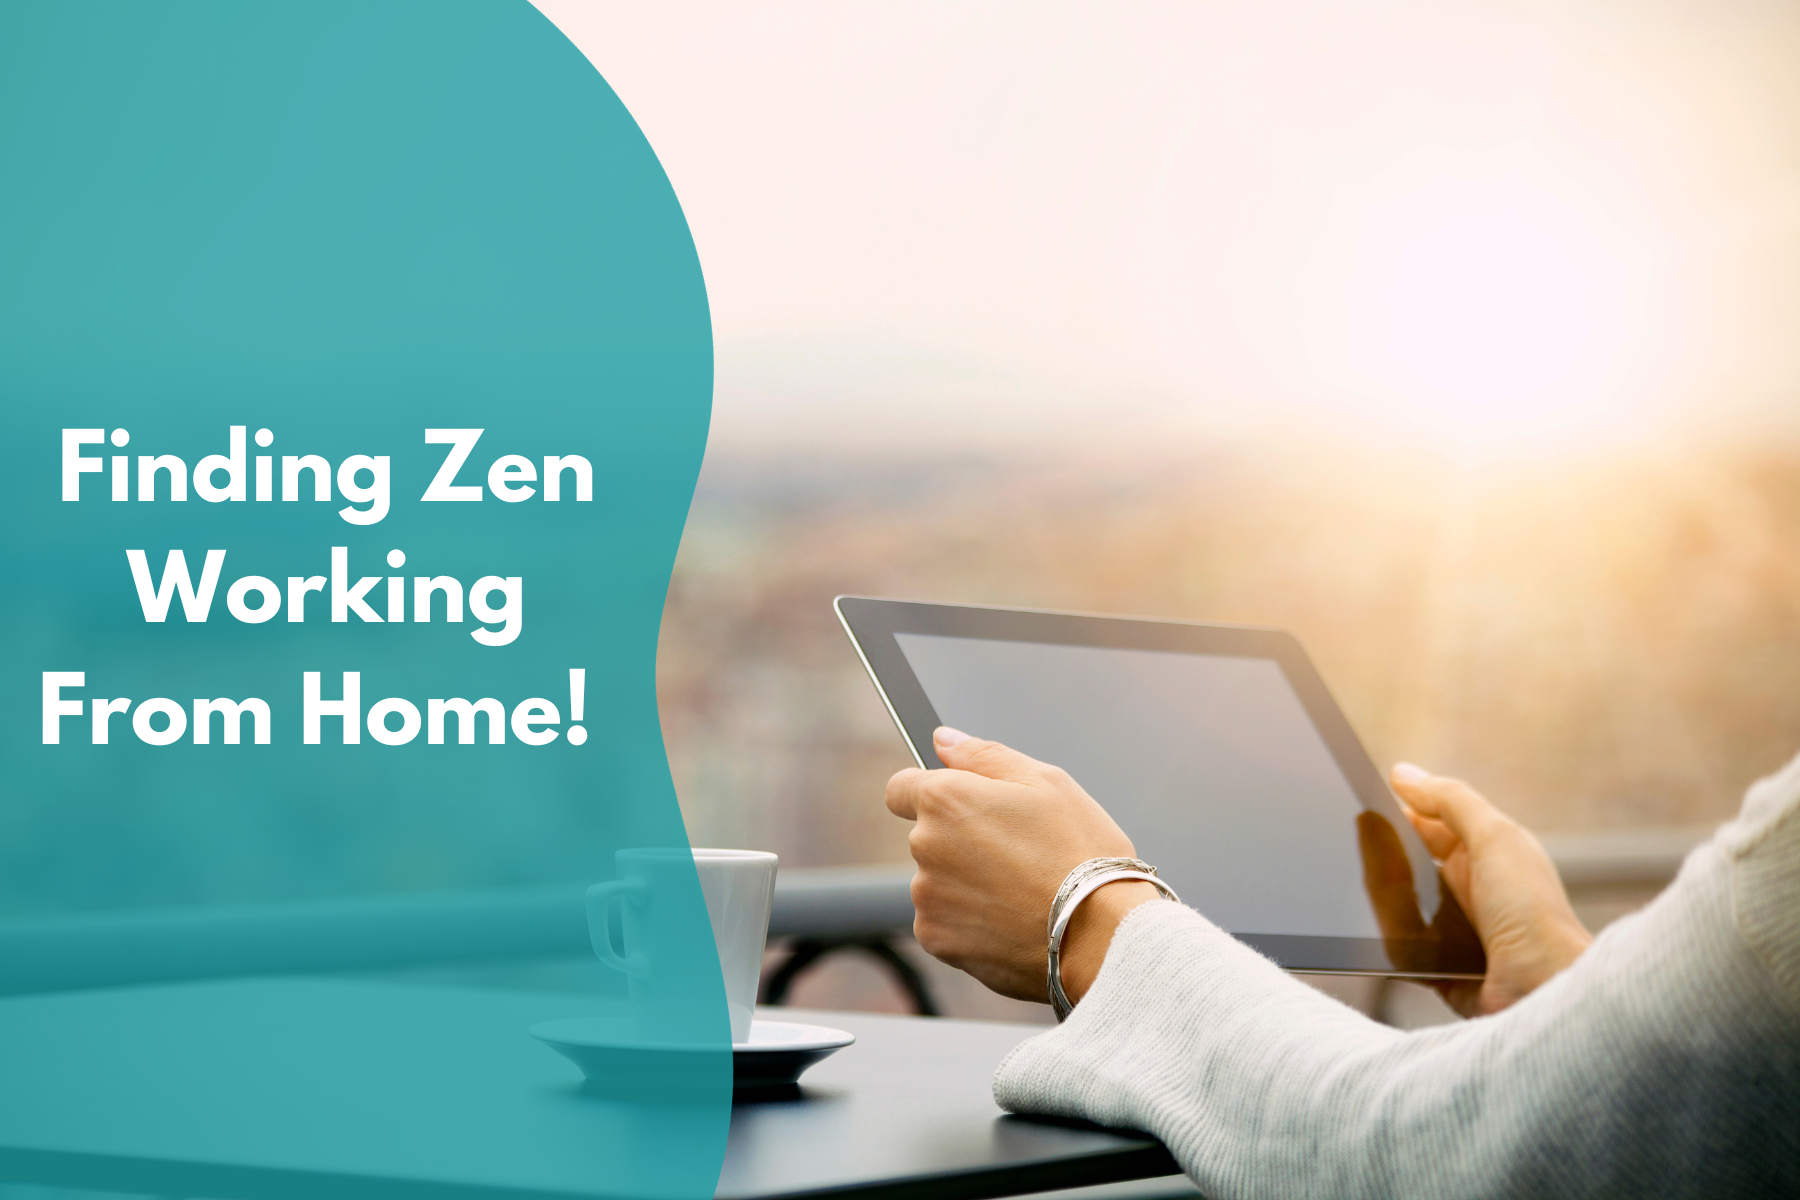 Finding Zen working from home